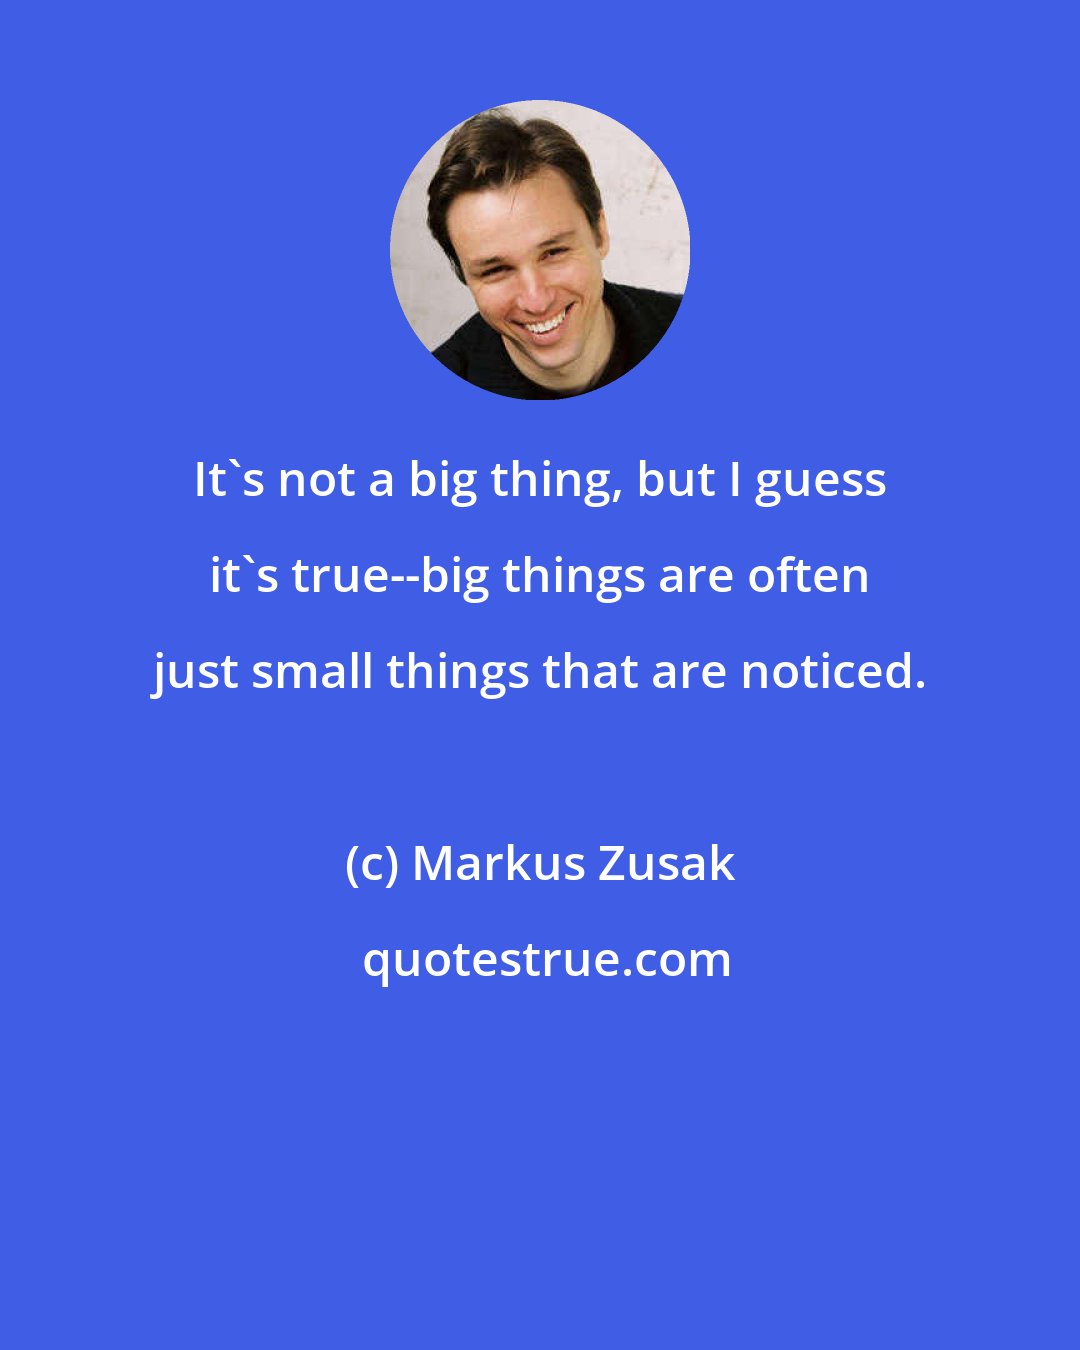 Markus Zusak: It's not a big thing, but I guess it's true--big things are often just small things that are noticed.